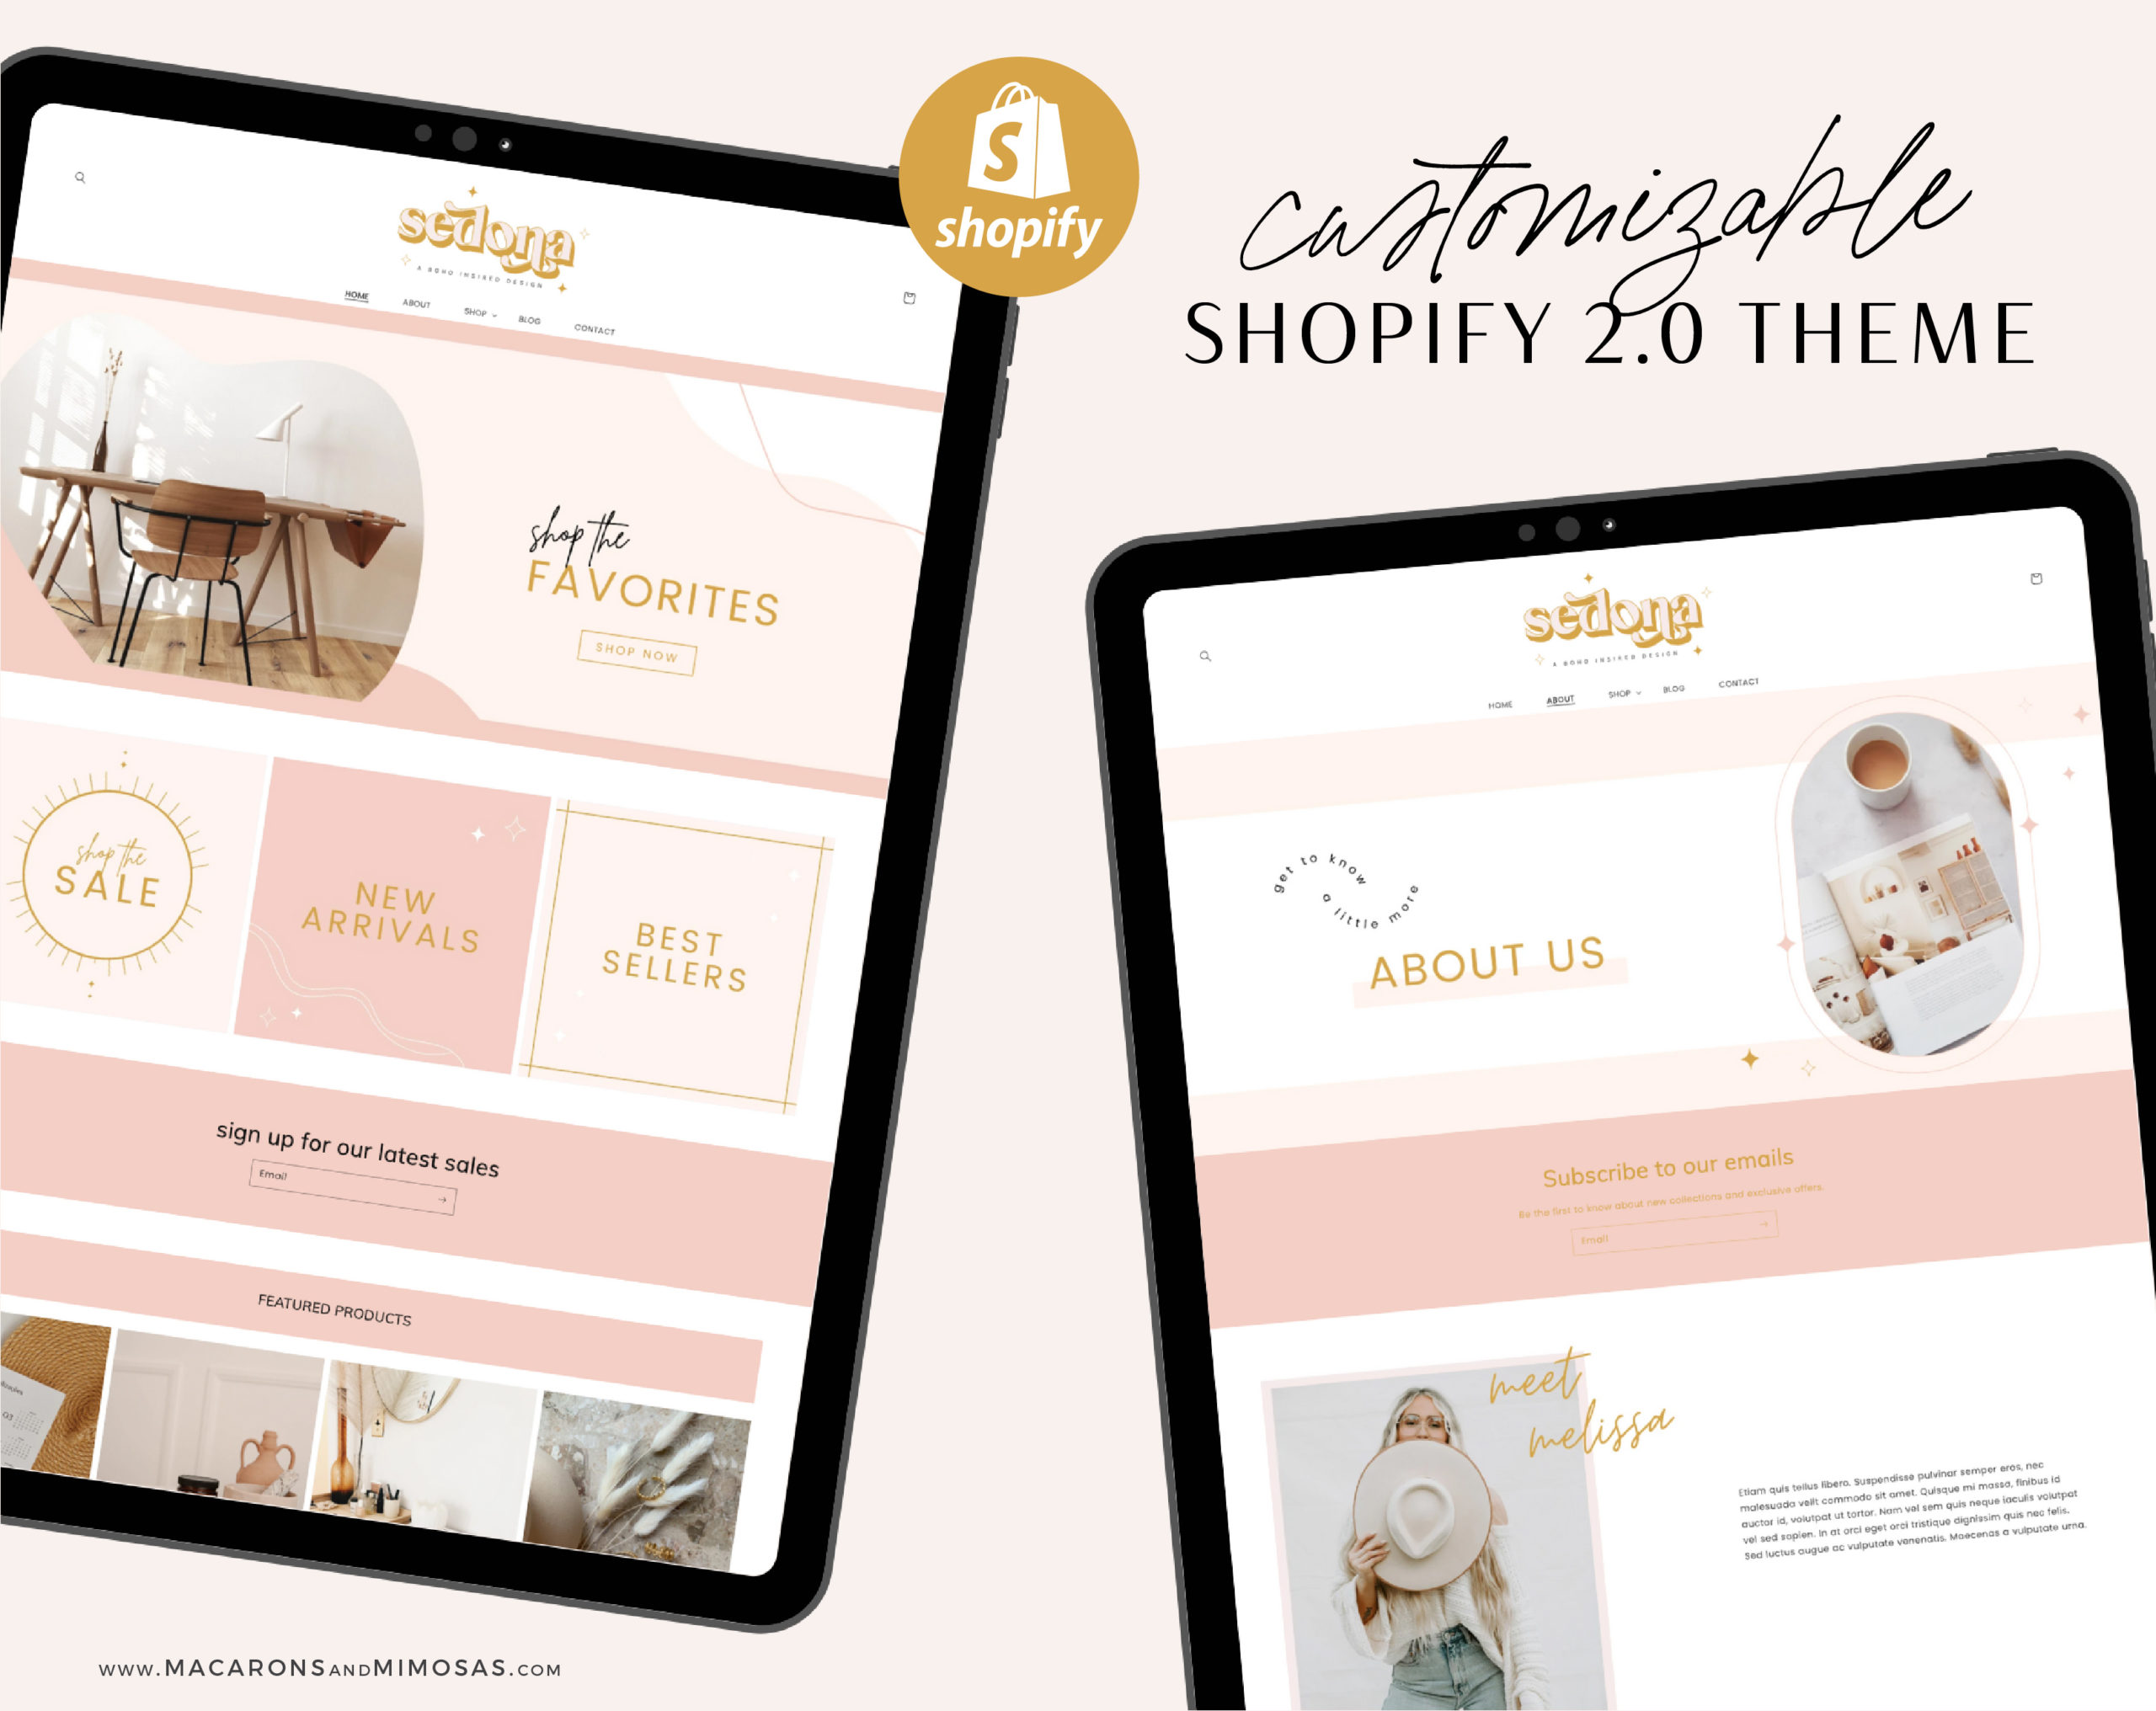 Boho Shopify theme with store banners to edit in Canva. A beautiful, bohemian ecommerce template for your Shopify website.